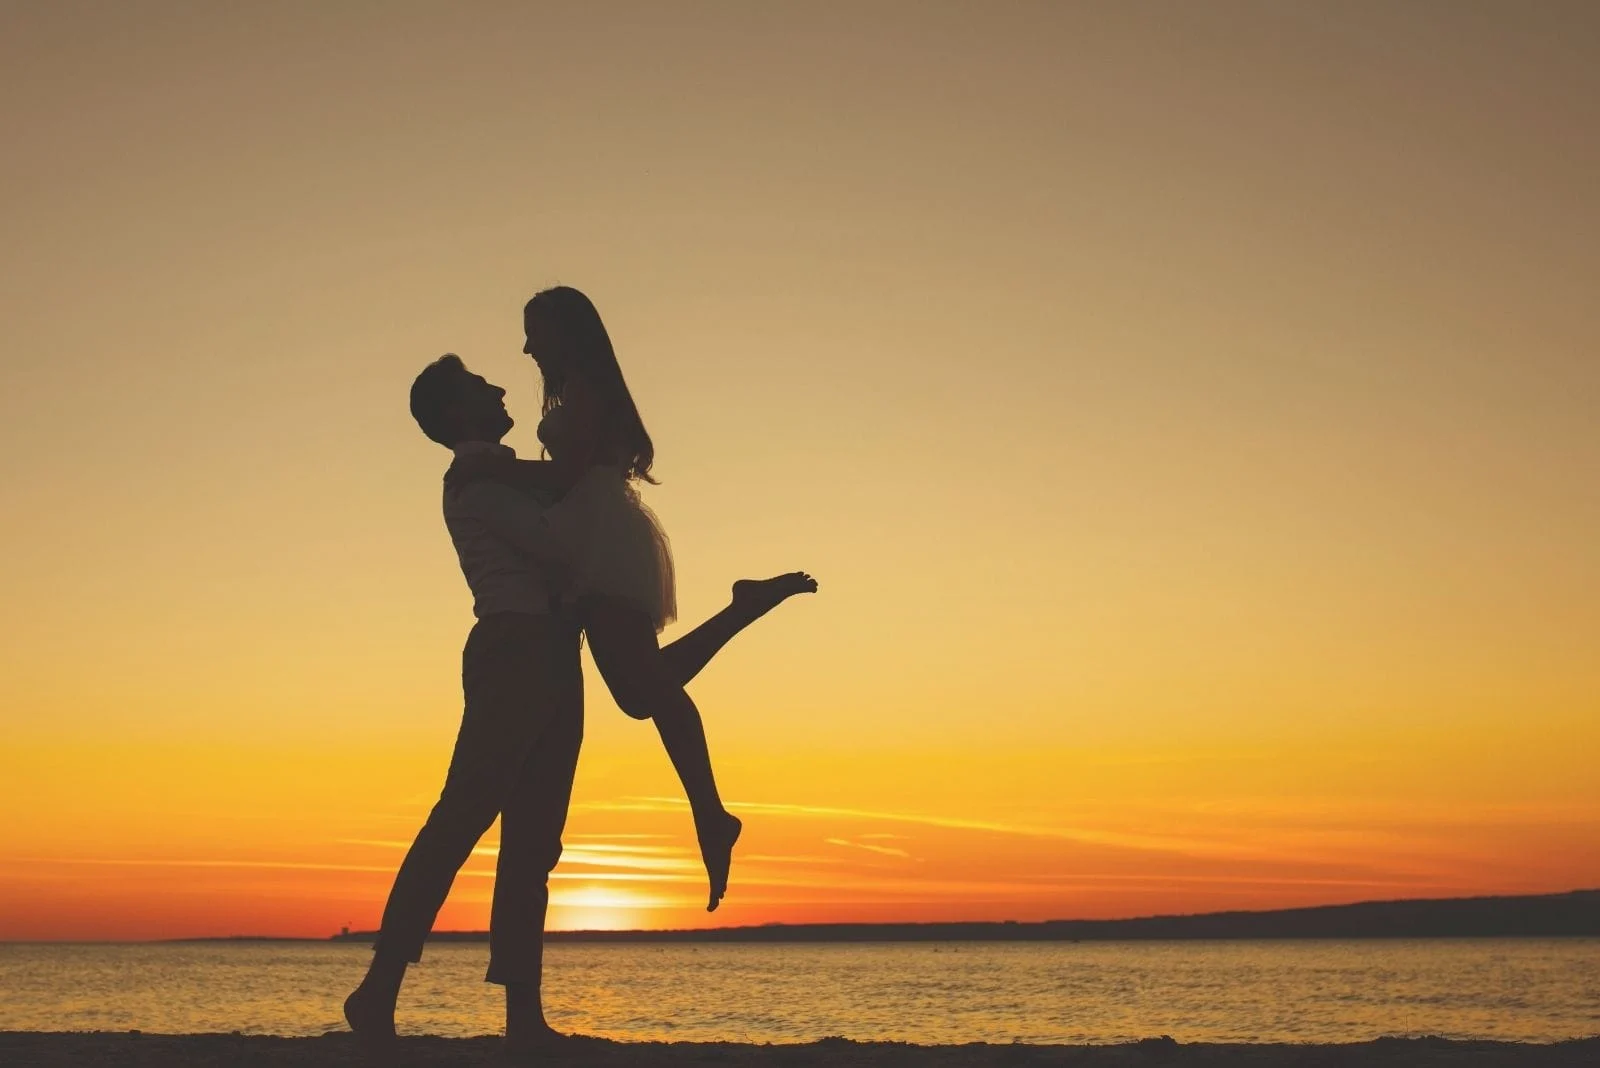 lovely couple in love silhouette during sunrise near a body of water